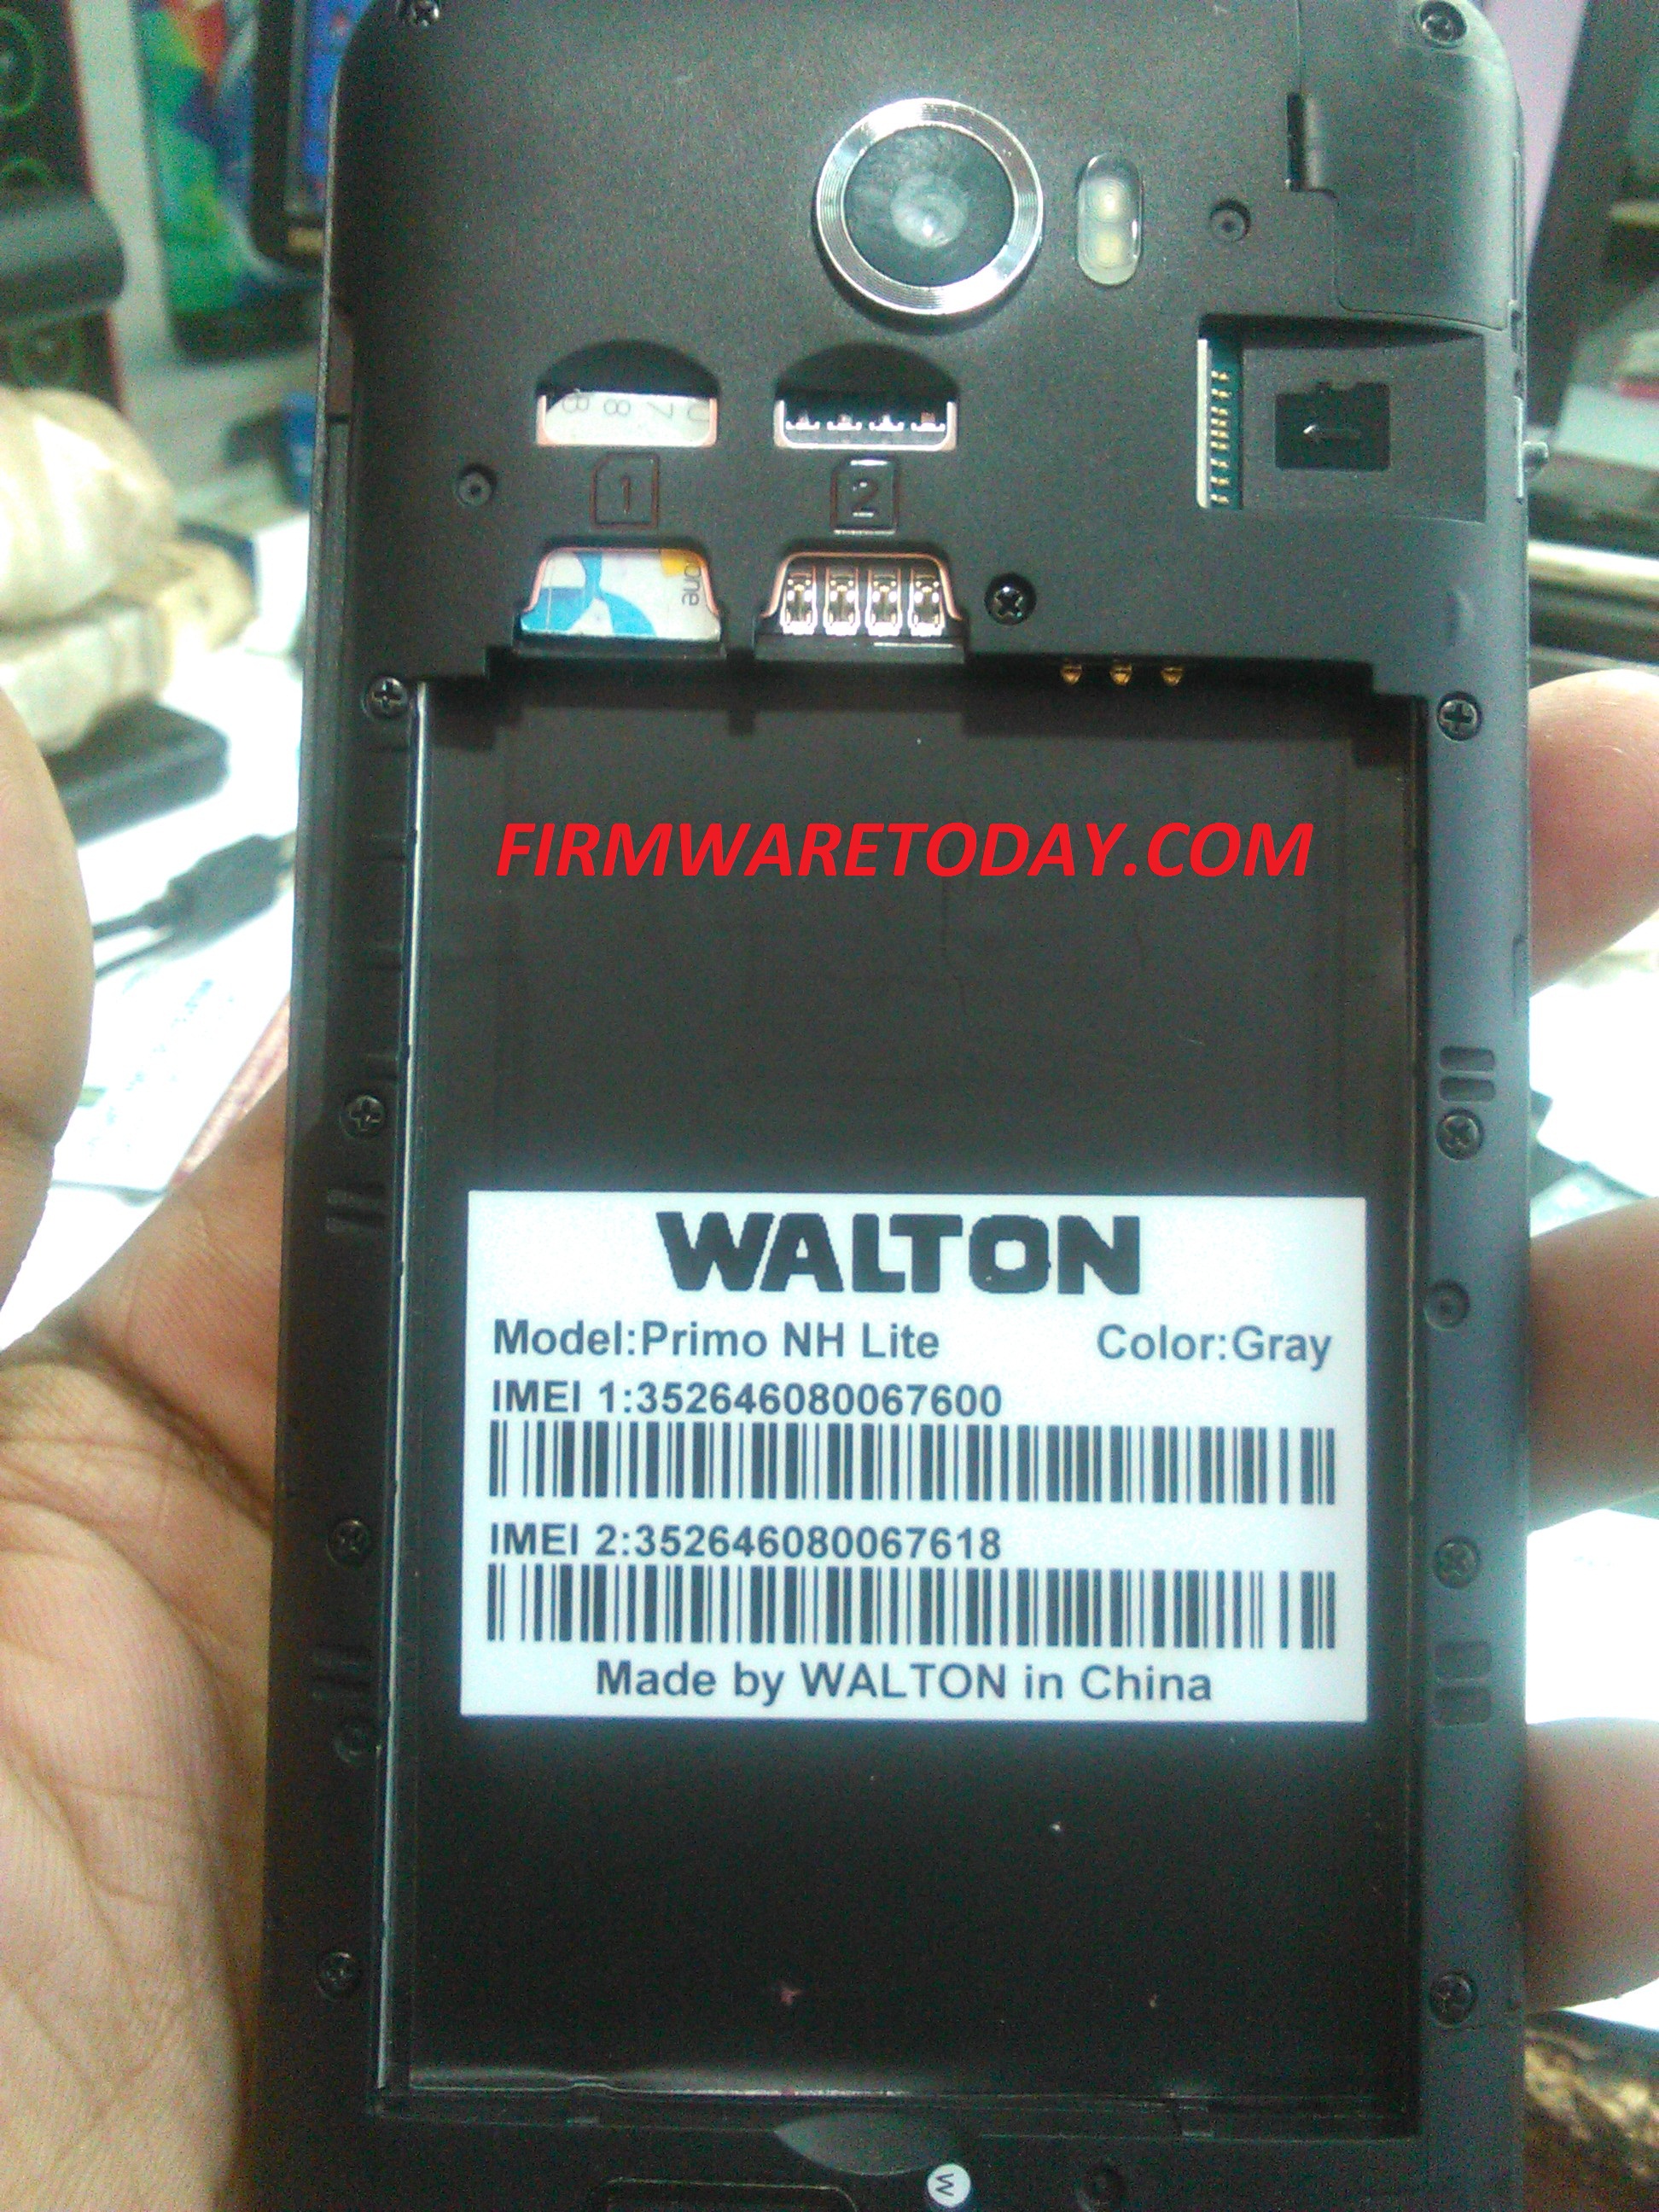 WALTON Primo NH Lite official firmware Without Pass update 2000% Tested by firmwaretoday.com